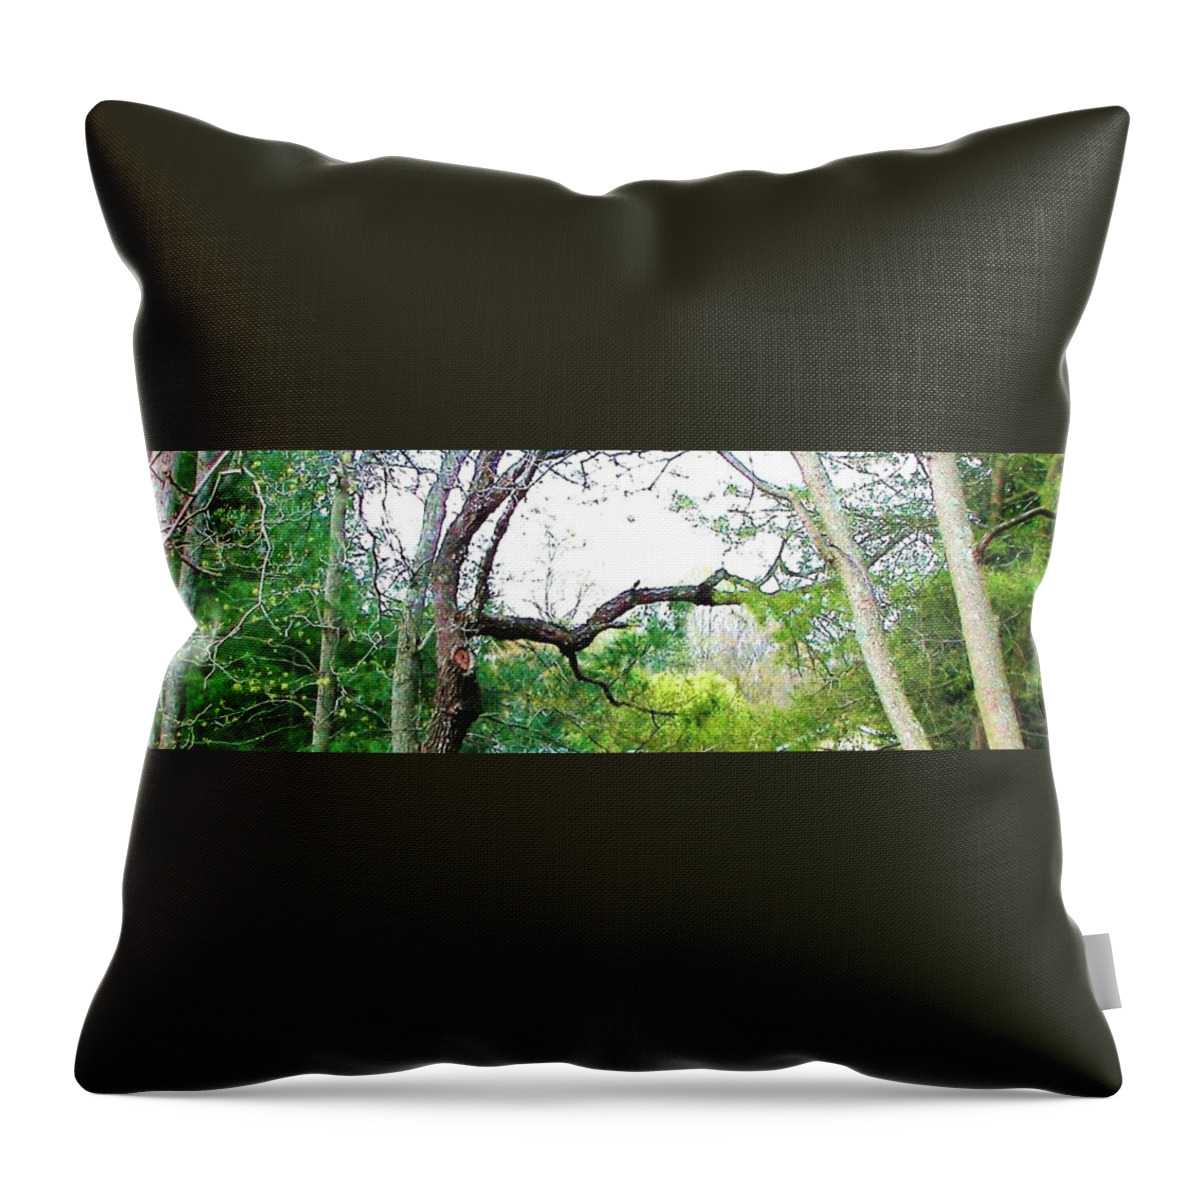 Trees Throw Pillow featuring the photograph Flying Branch by Pamela Hyde Wilson